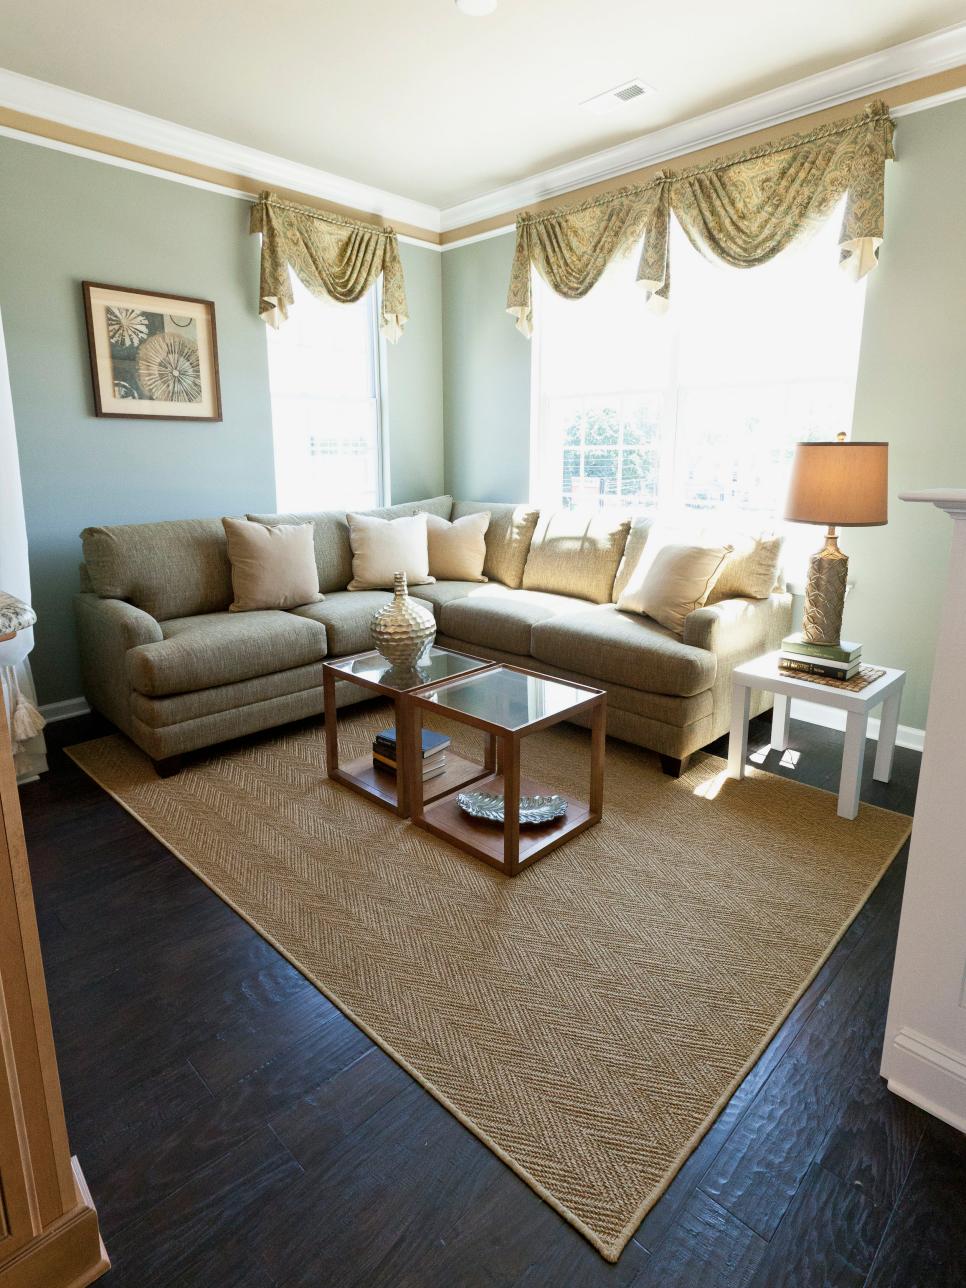 Tan and Green Living Room With Sectional Sofa and Area Rug